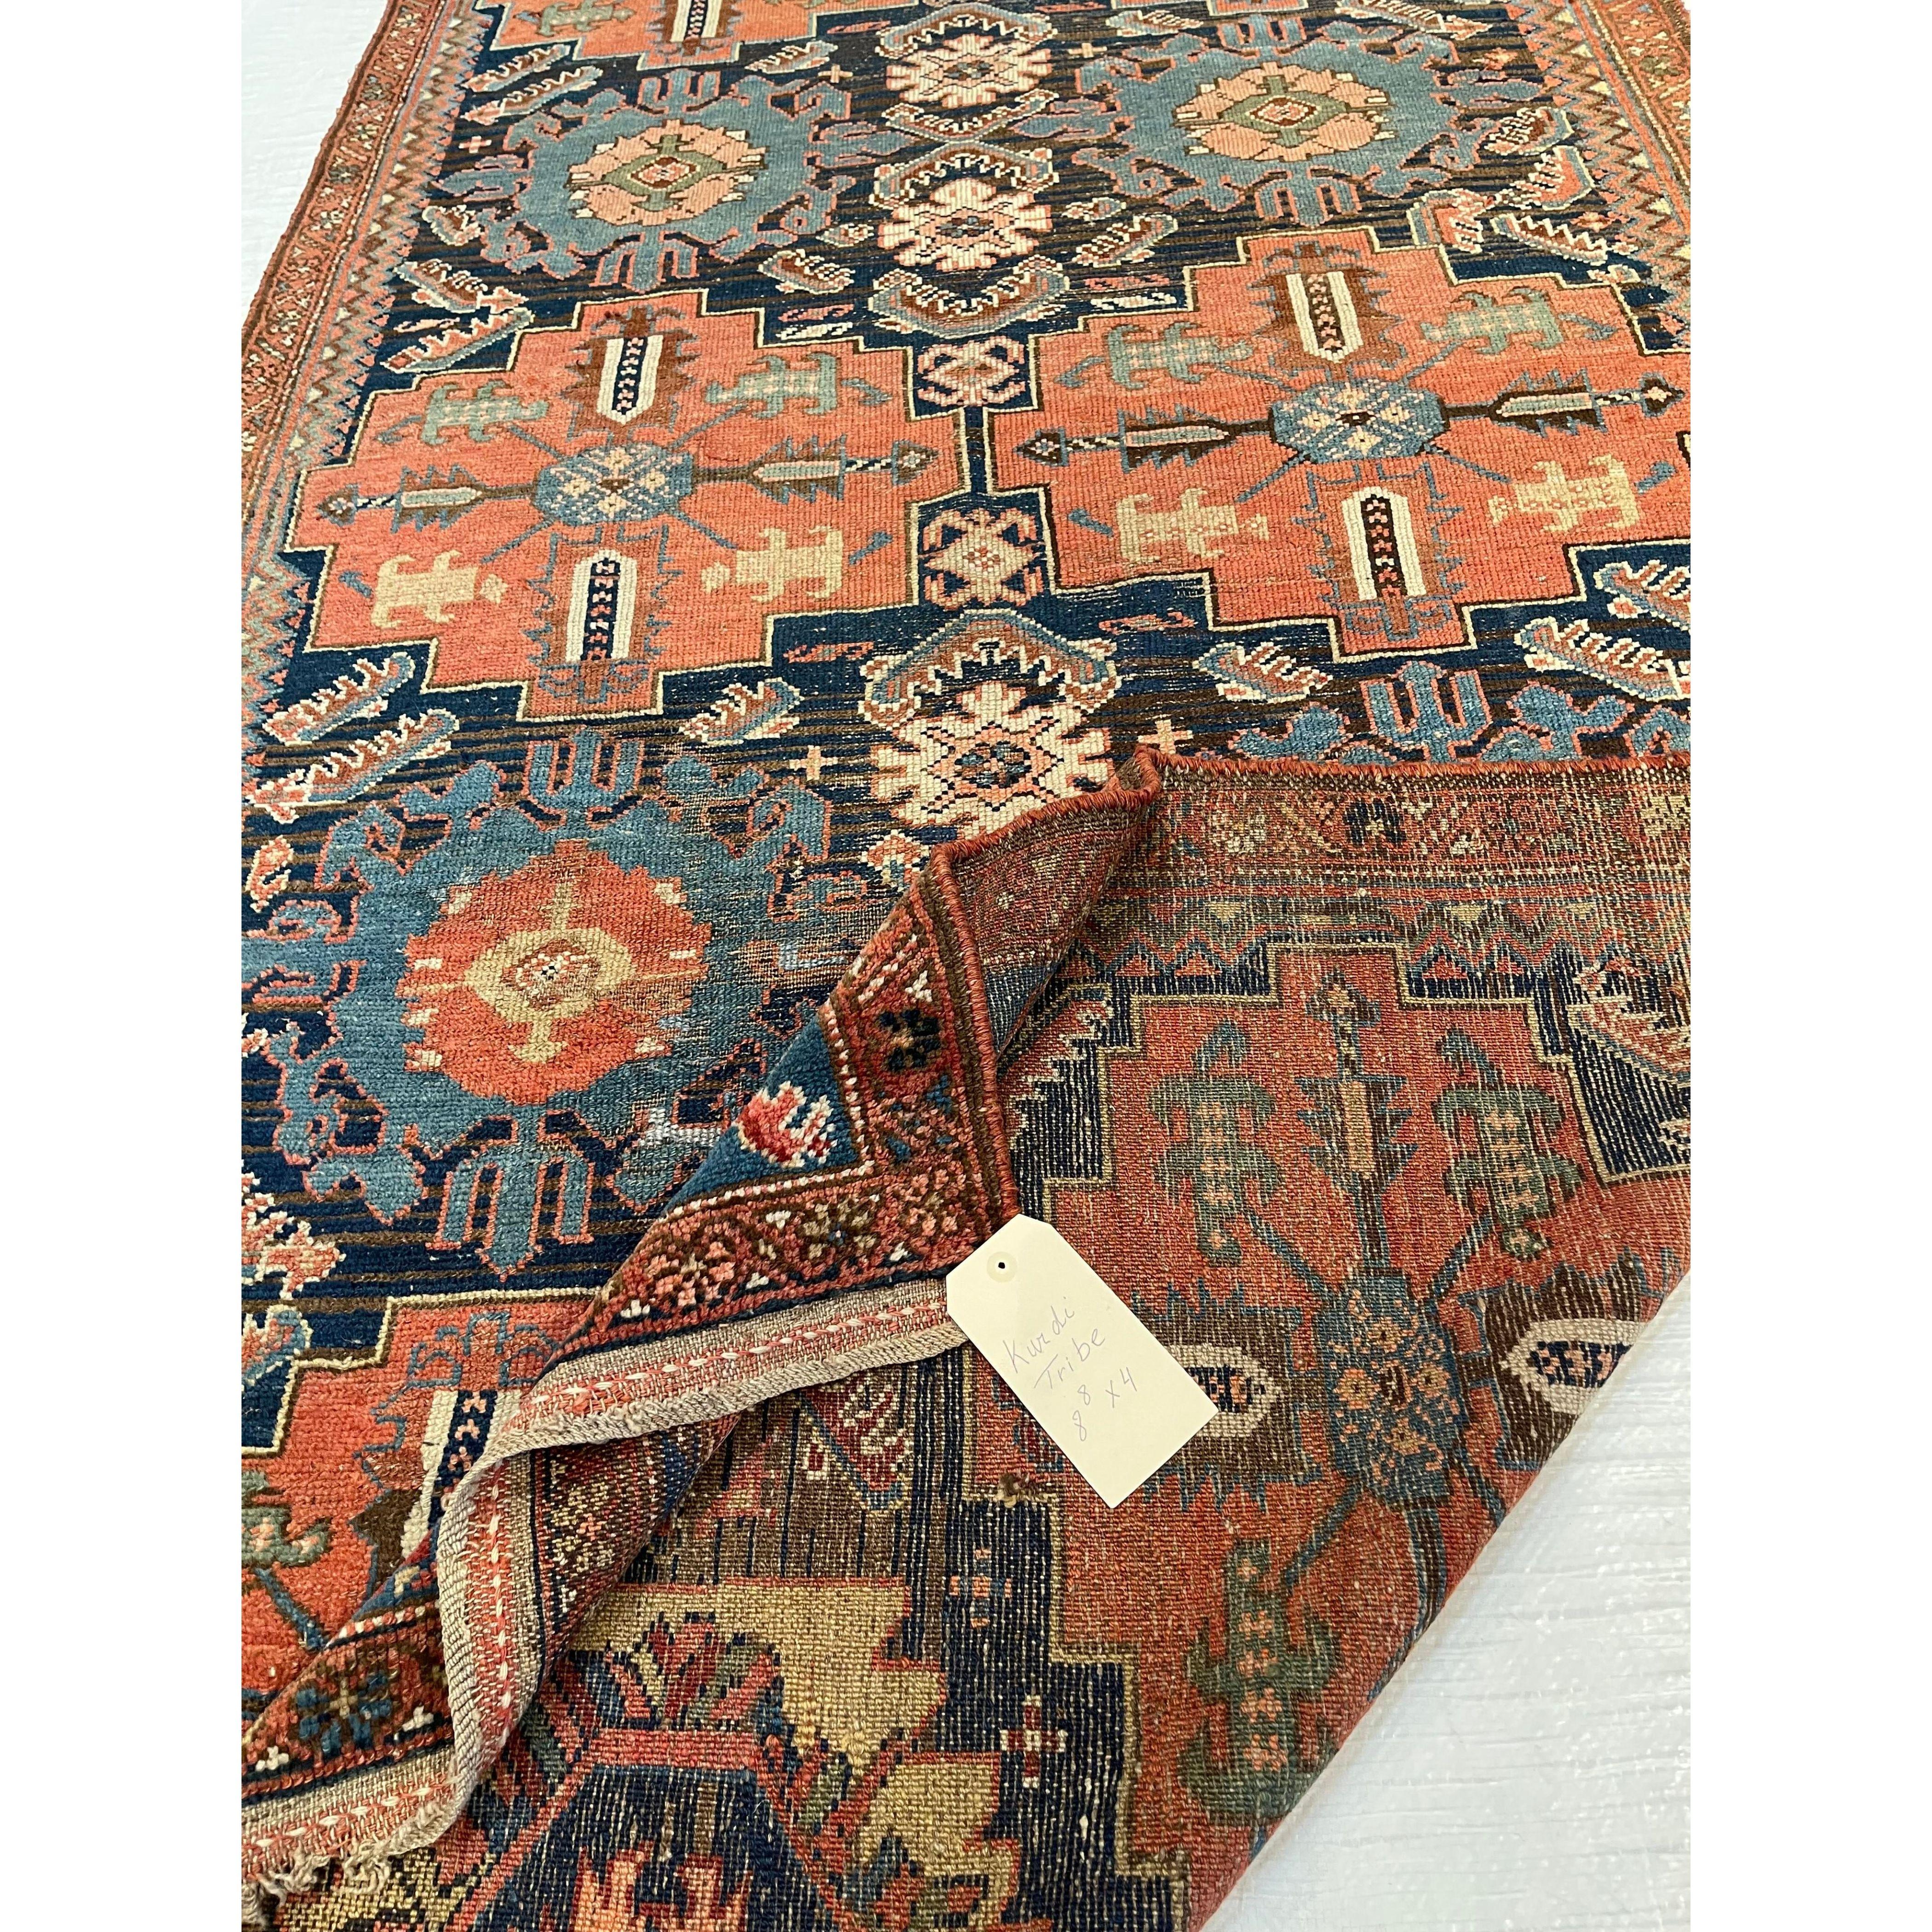 Kurdish rugs are as diverse as the ethnic weavers who created them. The presence of Kurdish weavers in the northwestern area of Persia and the Iranian Kurdistan region has led to some stylistic overlap. Antique Kurdish rugs are one of the few